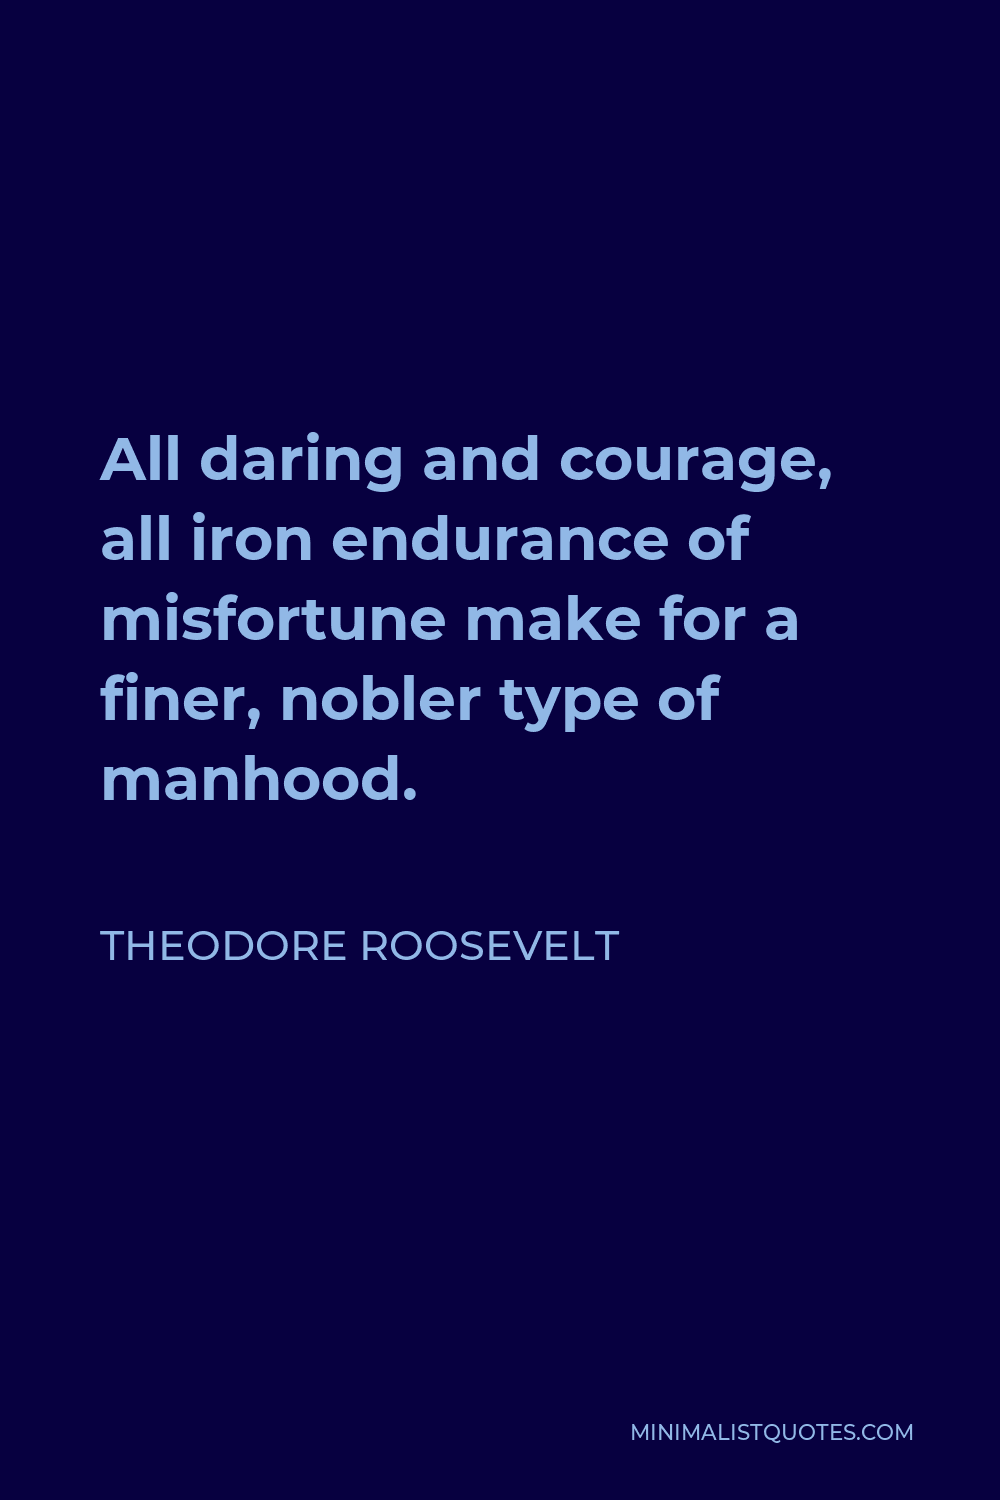 Theodore Roosevelt Quote - All daring and courage, all iron endurance of misfortune make for a finer, nobler type of manhood.